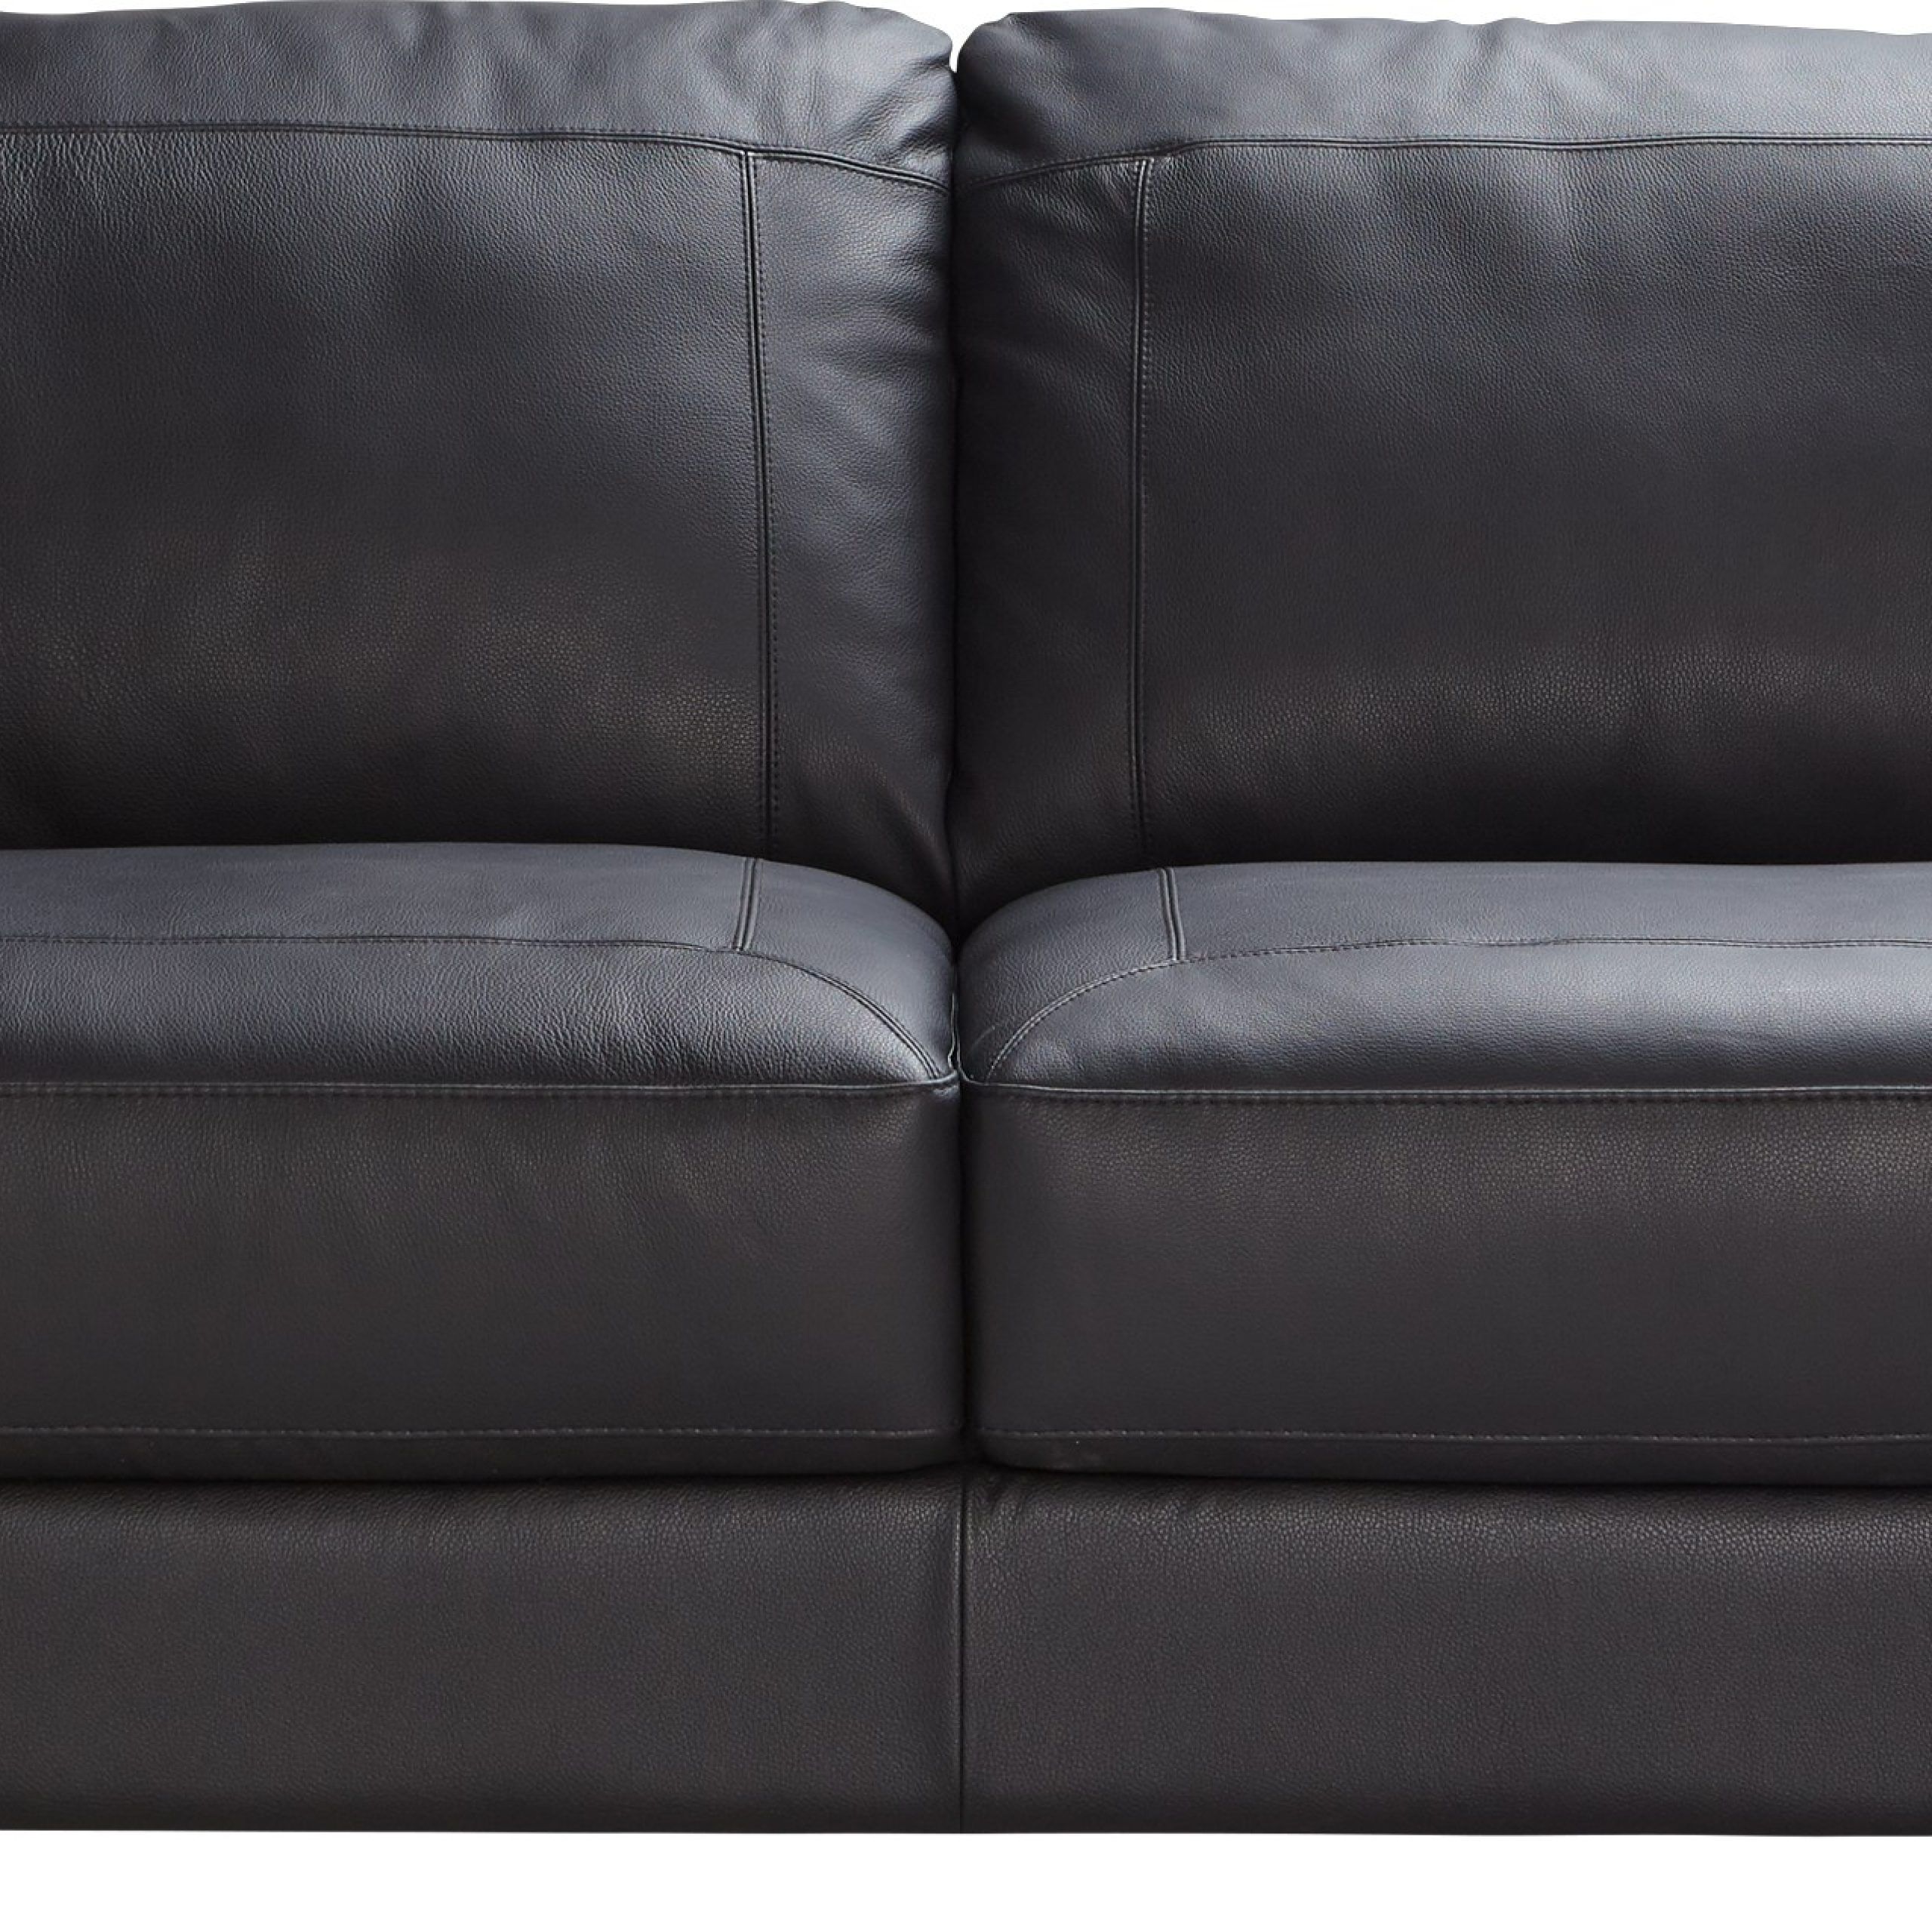 Black Leather Sofas – Storiestrending Within Black Faux Suede Memory Foam Sofas (View 19 of 20)